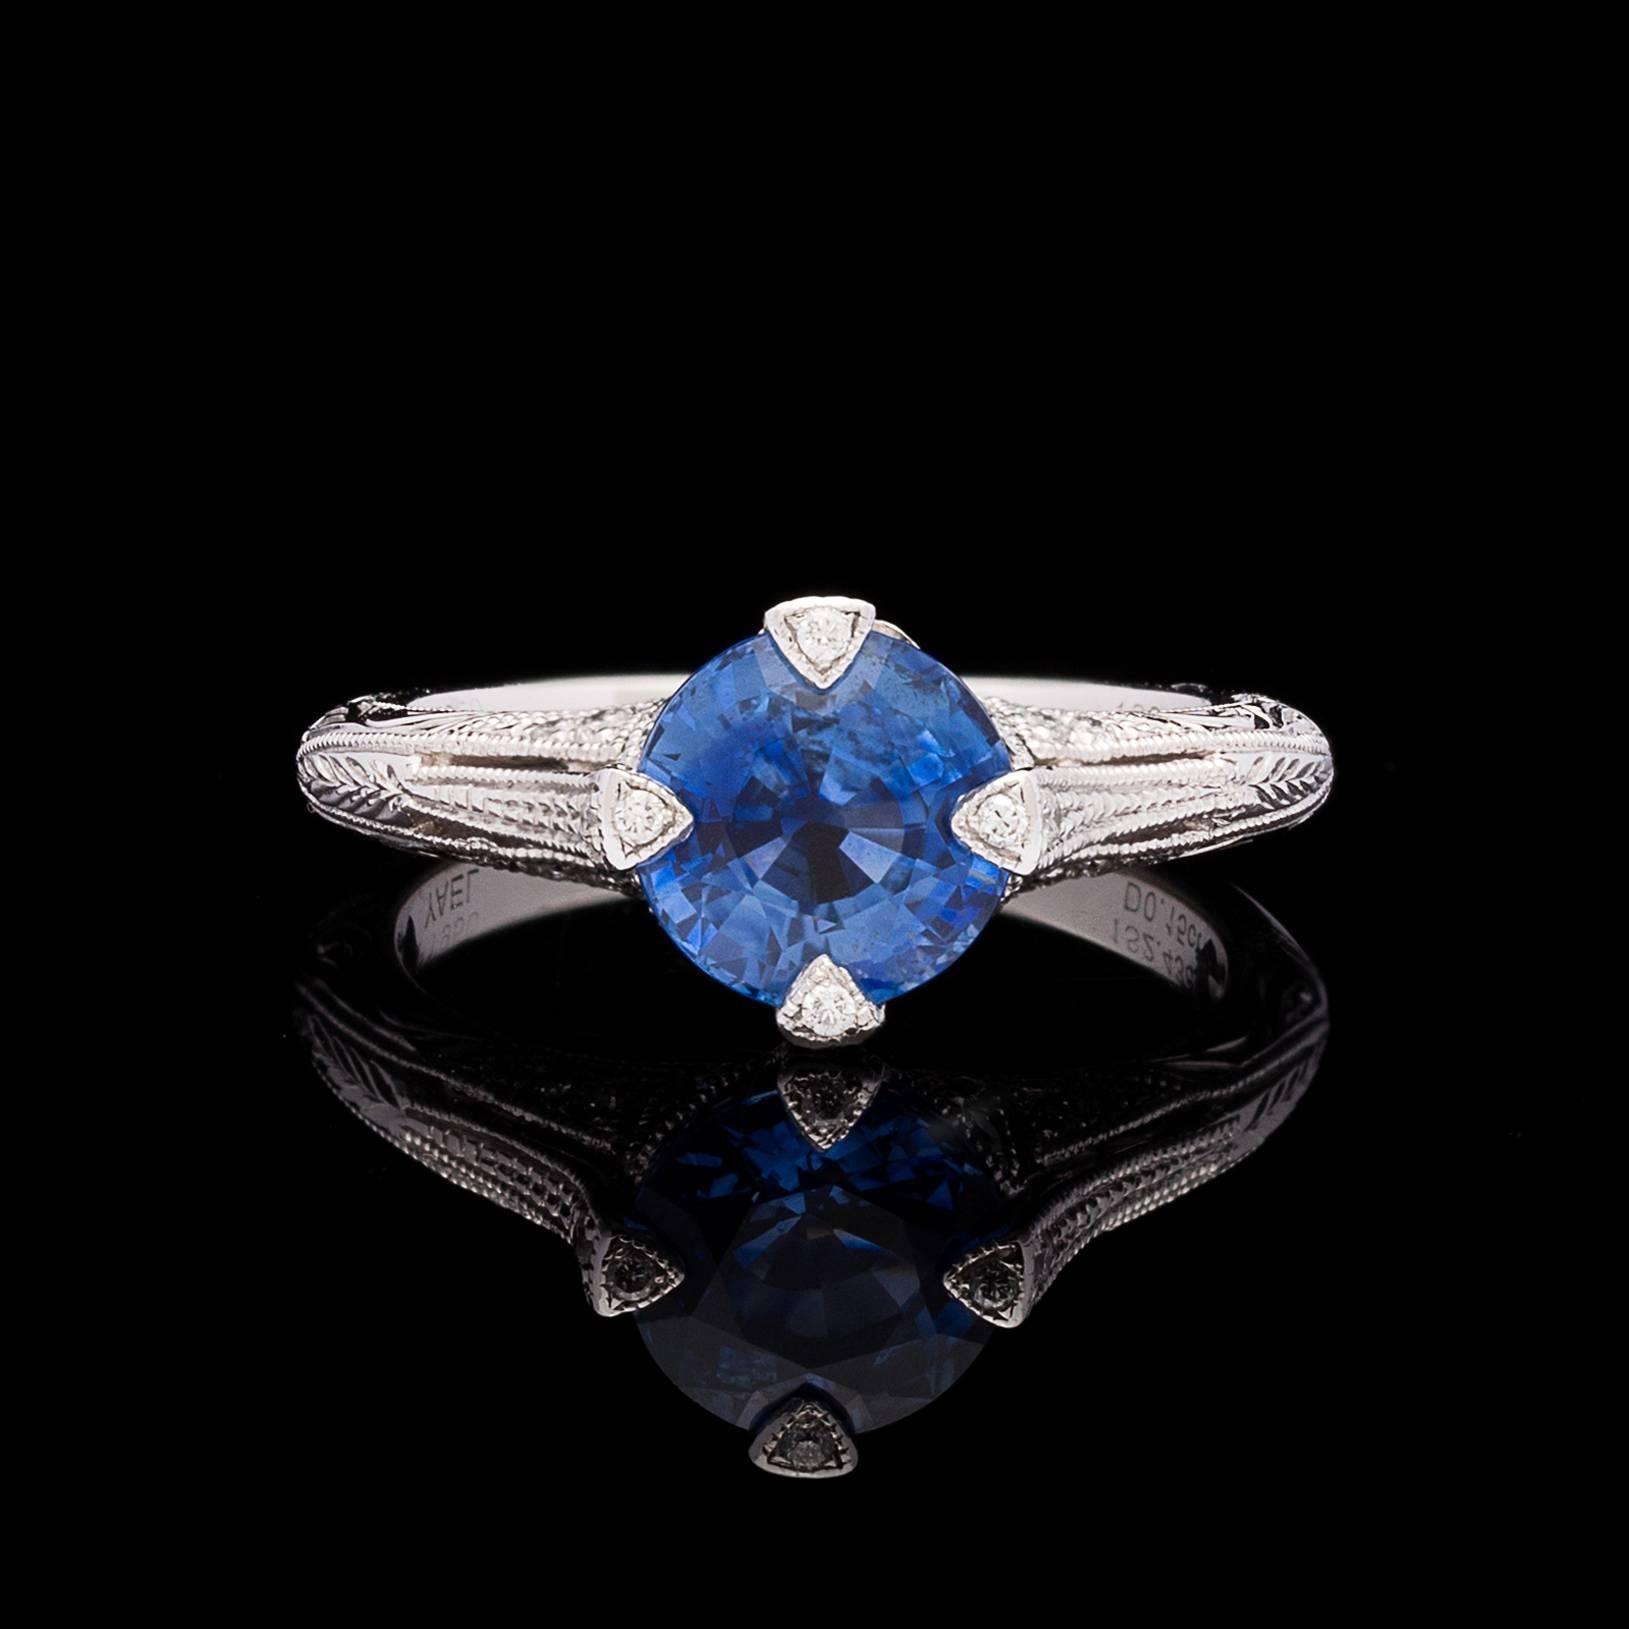 Natural Royal Blue Ceylon Round Mixed Cut Sapphire Set in a Platinum Setting Recreated from a Vintage Design Discovered in one of America’s Top Antique Jewelry Stores.  The 2.43 carat stone is prong set with milgrain detail and adorned with 24 round